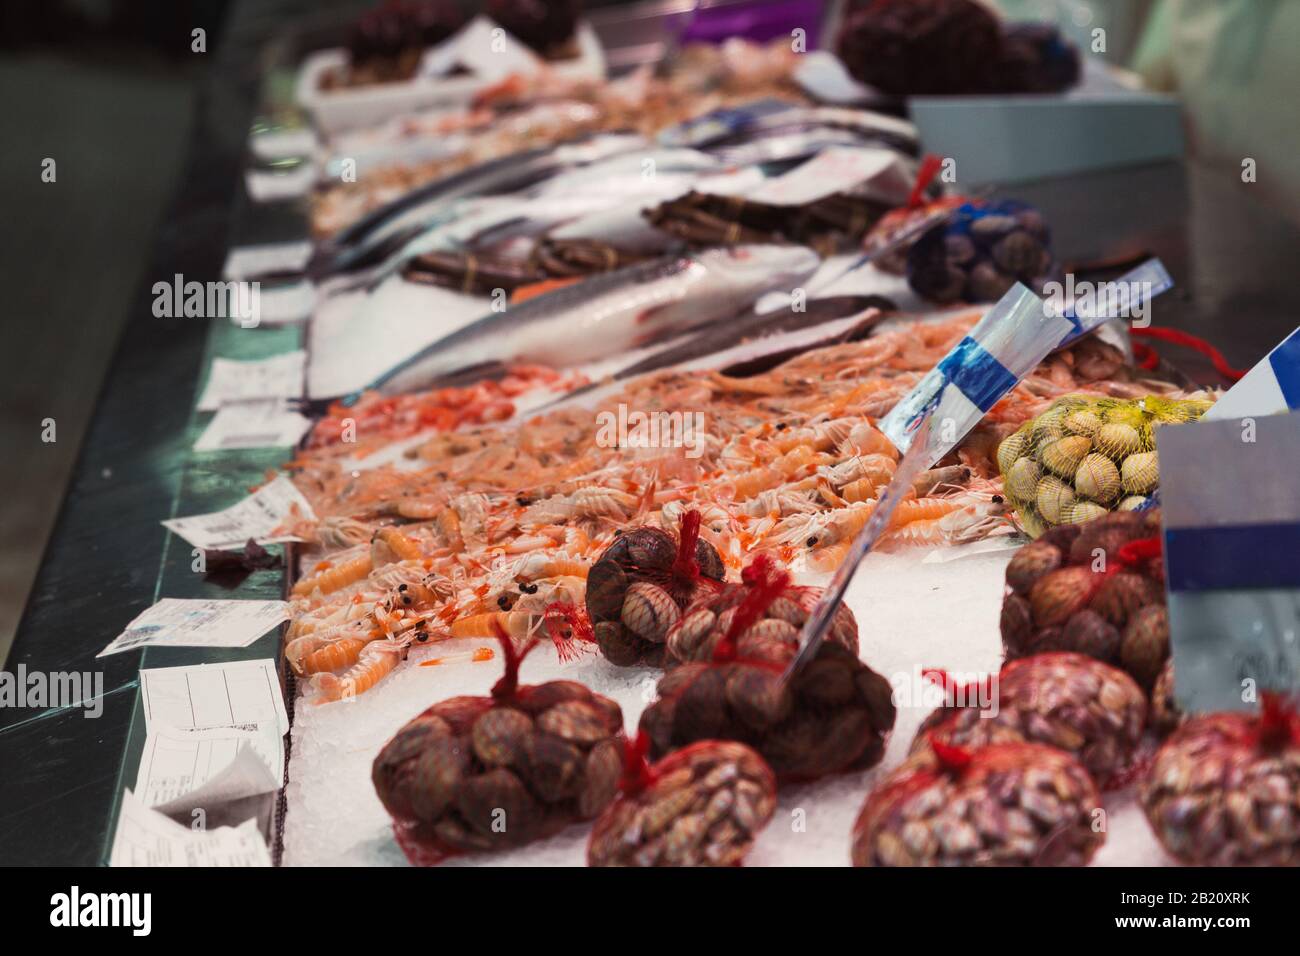 Stock photo of a market stall full of marine products such as fish or crustaceans Stock Photo